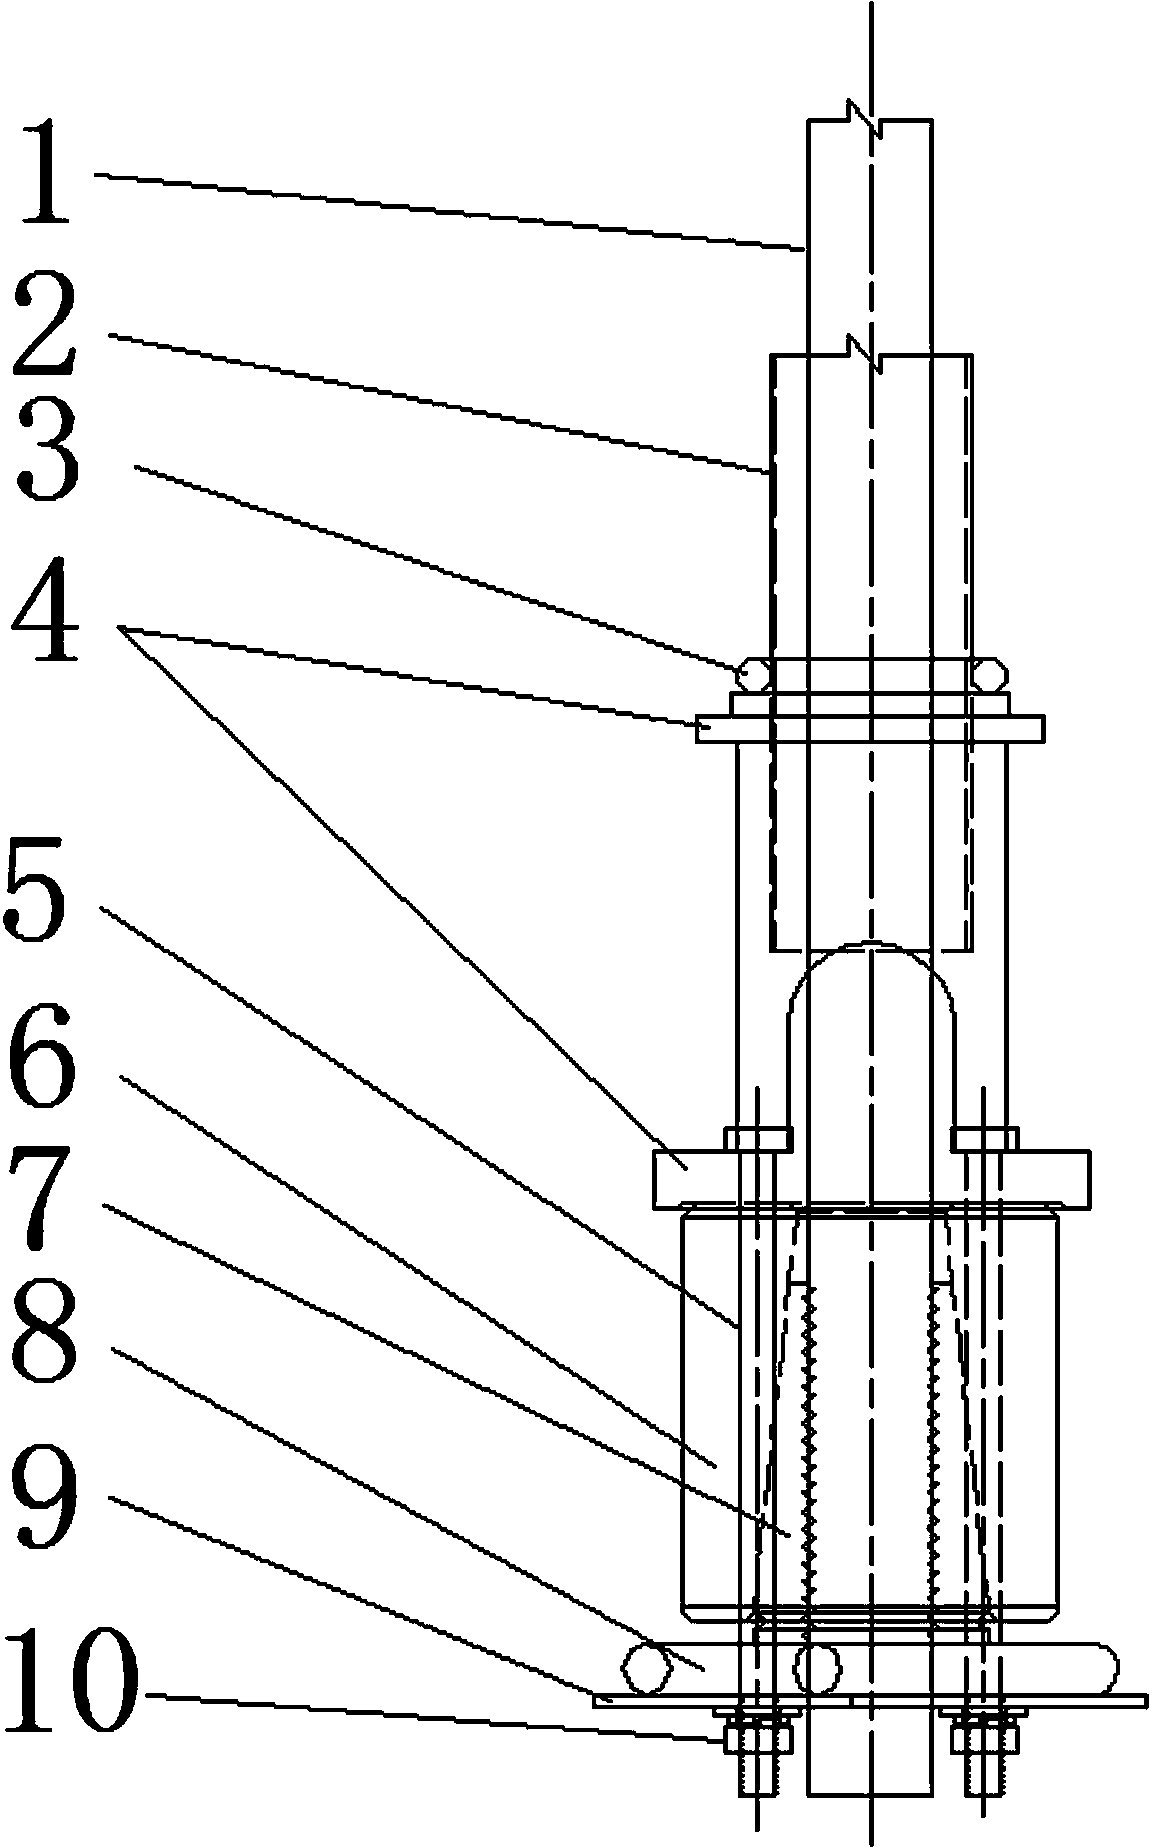 Device for limiting and protecting anchoring end of vertical steel strand